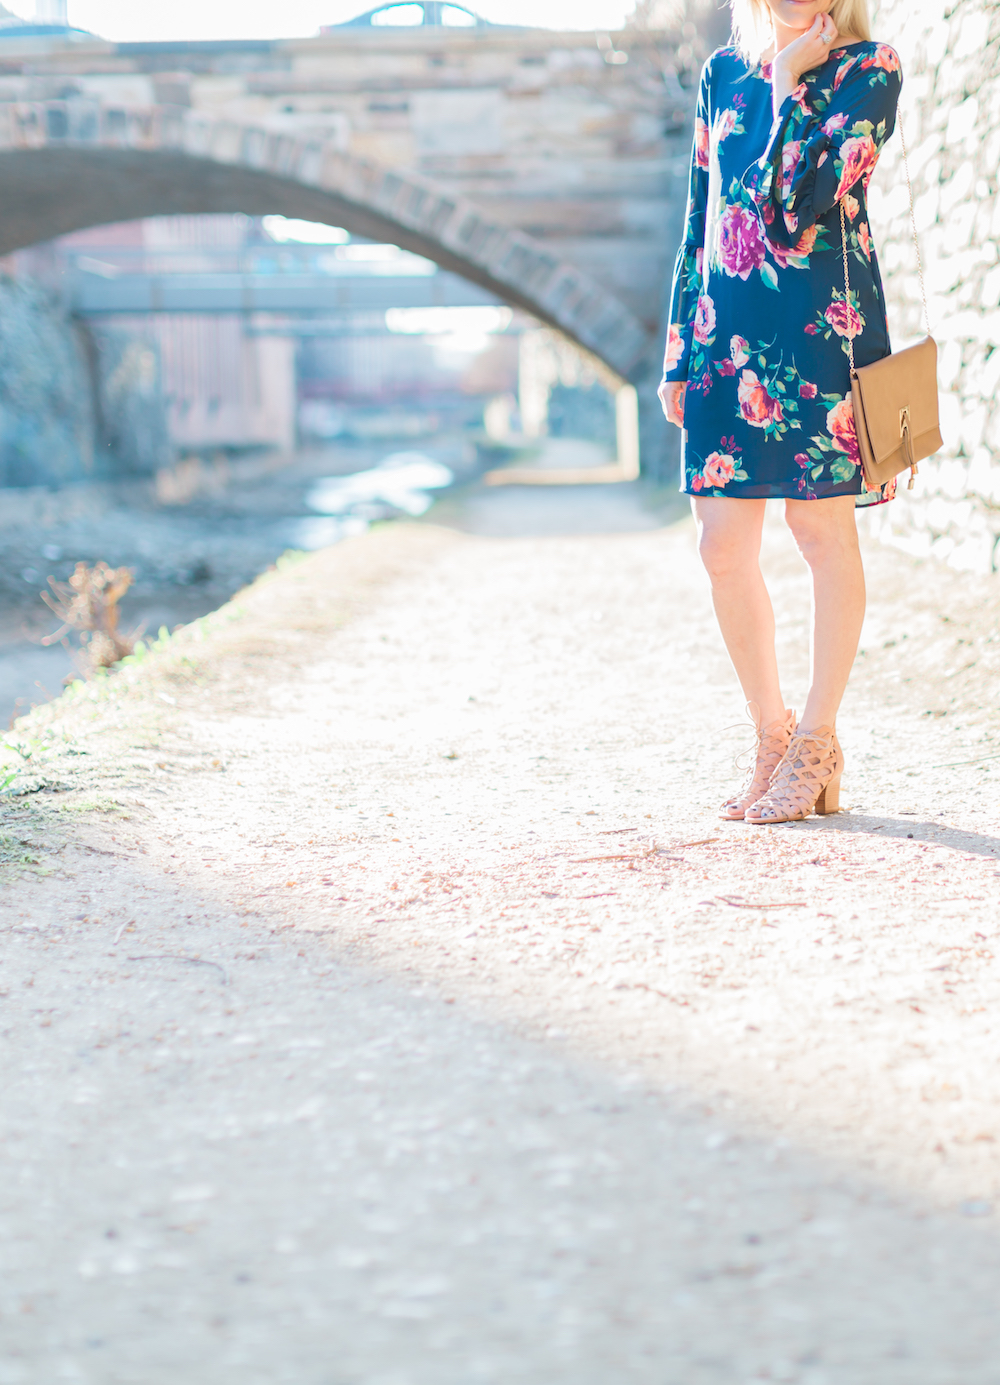 Florals + Blush spring sandals are the perfect combination for the ultimate spring look. 